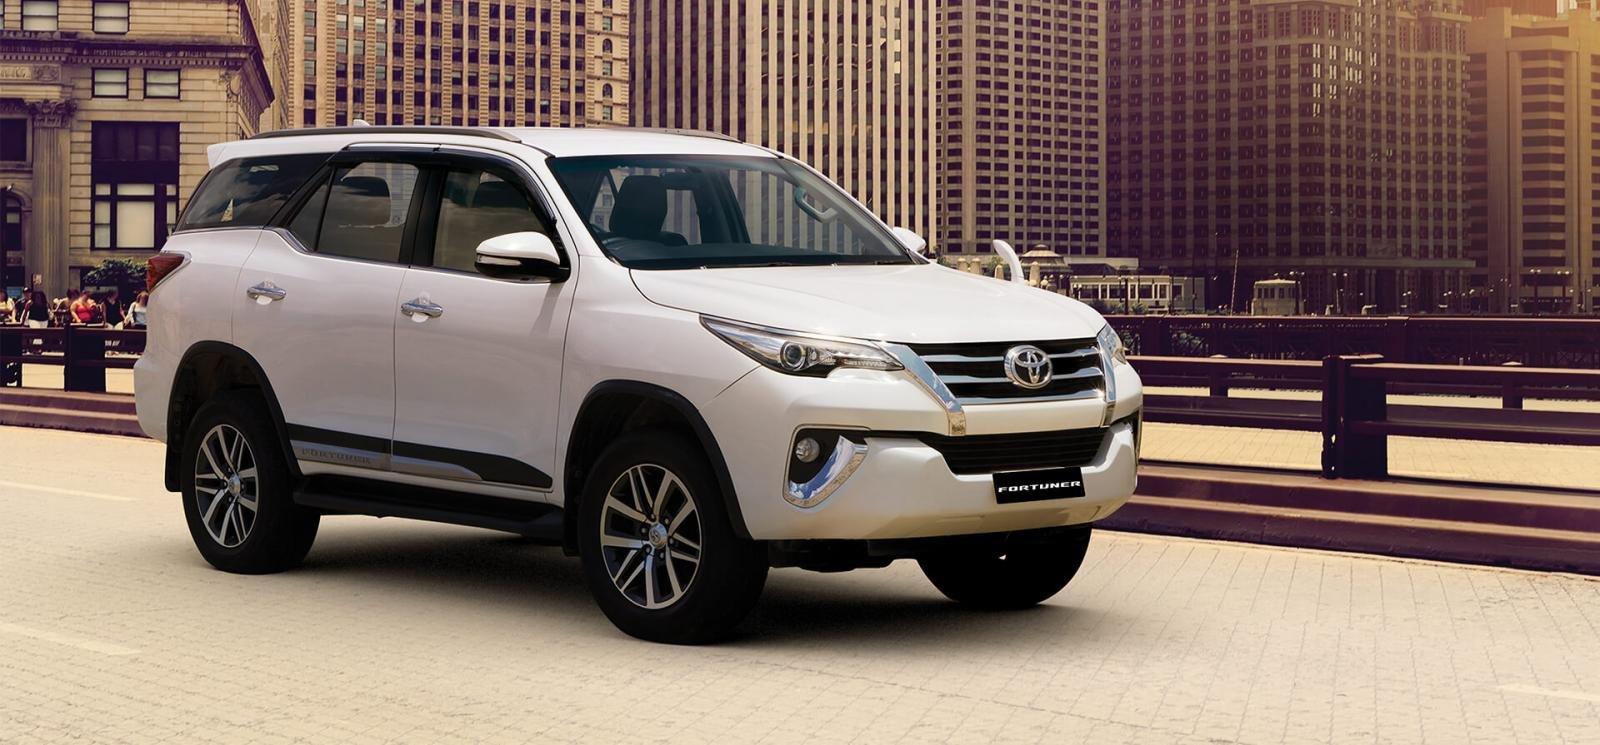 Toyota Fortuner Could Soon Get Costlier